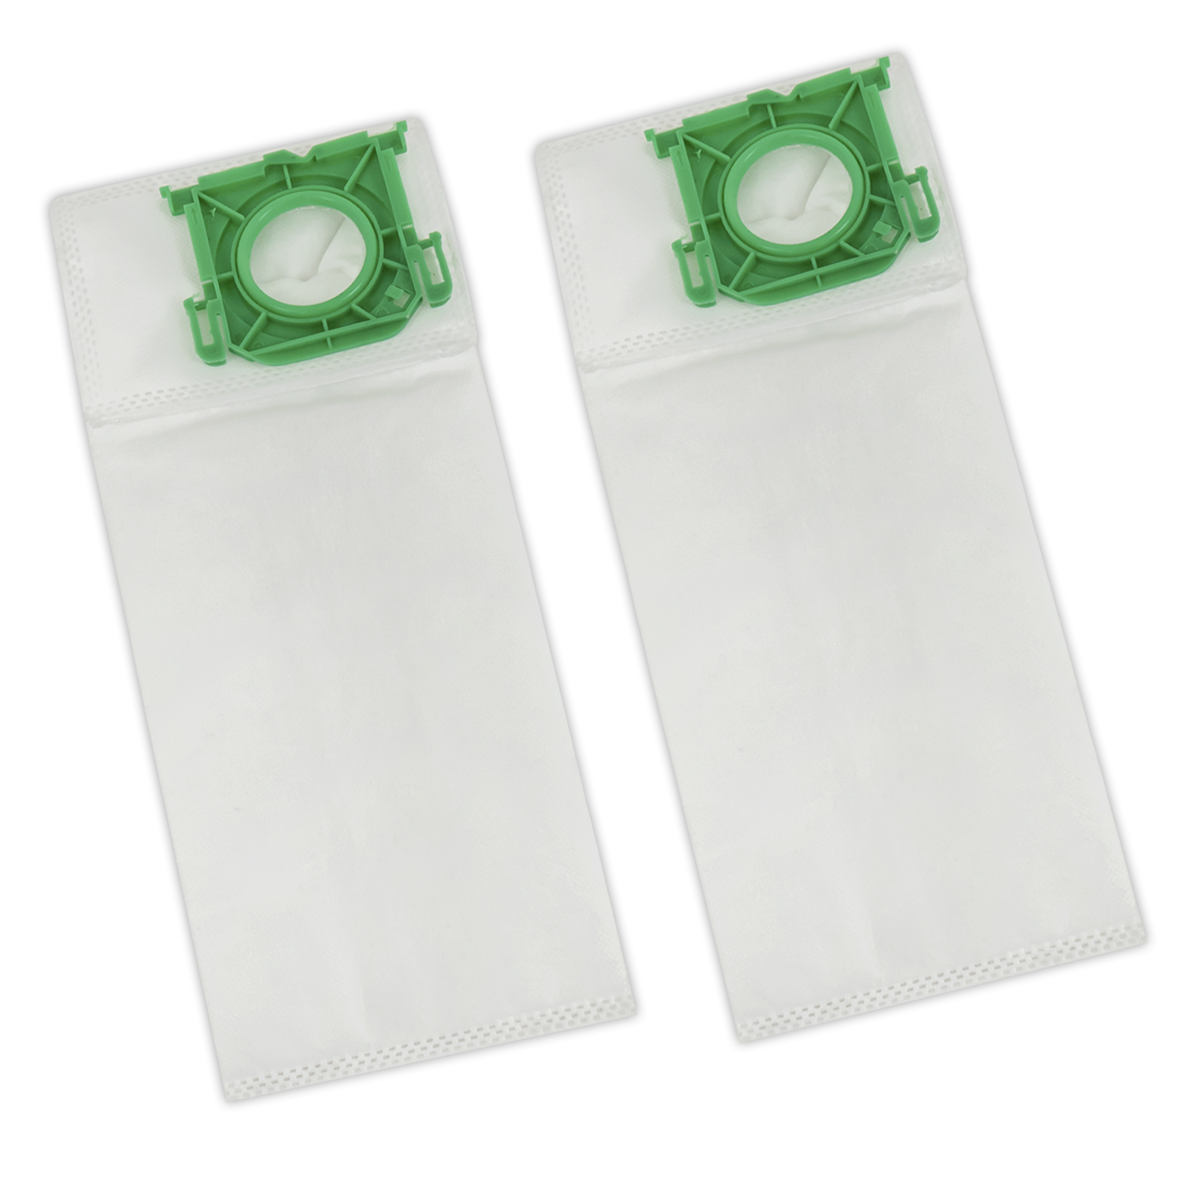 OEM Cheap Price Vacuum Dust Filter Bag For SEBO K1 K3 Vacuum Cleaner Parts Micro Non-woven Filter Dust Bag Accessories